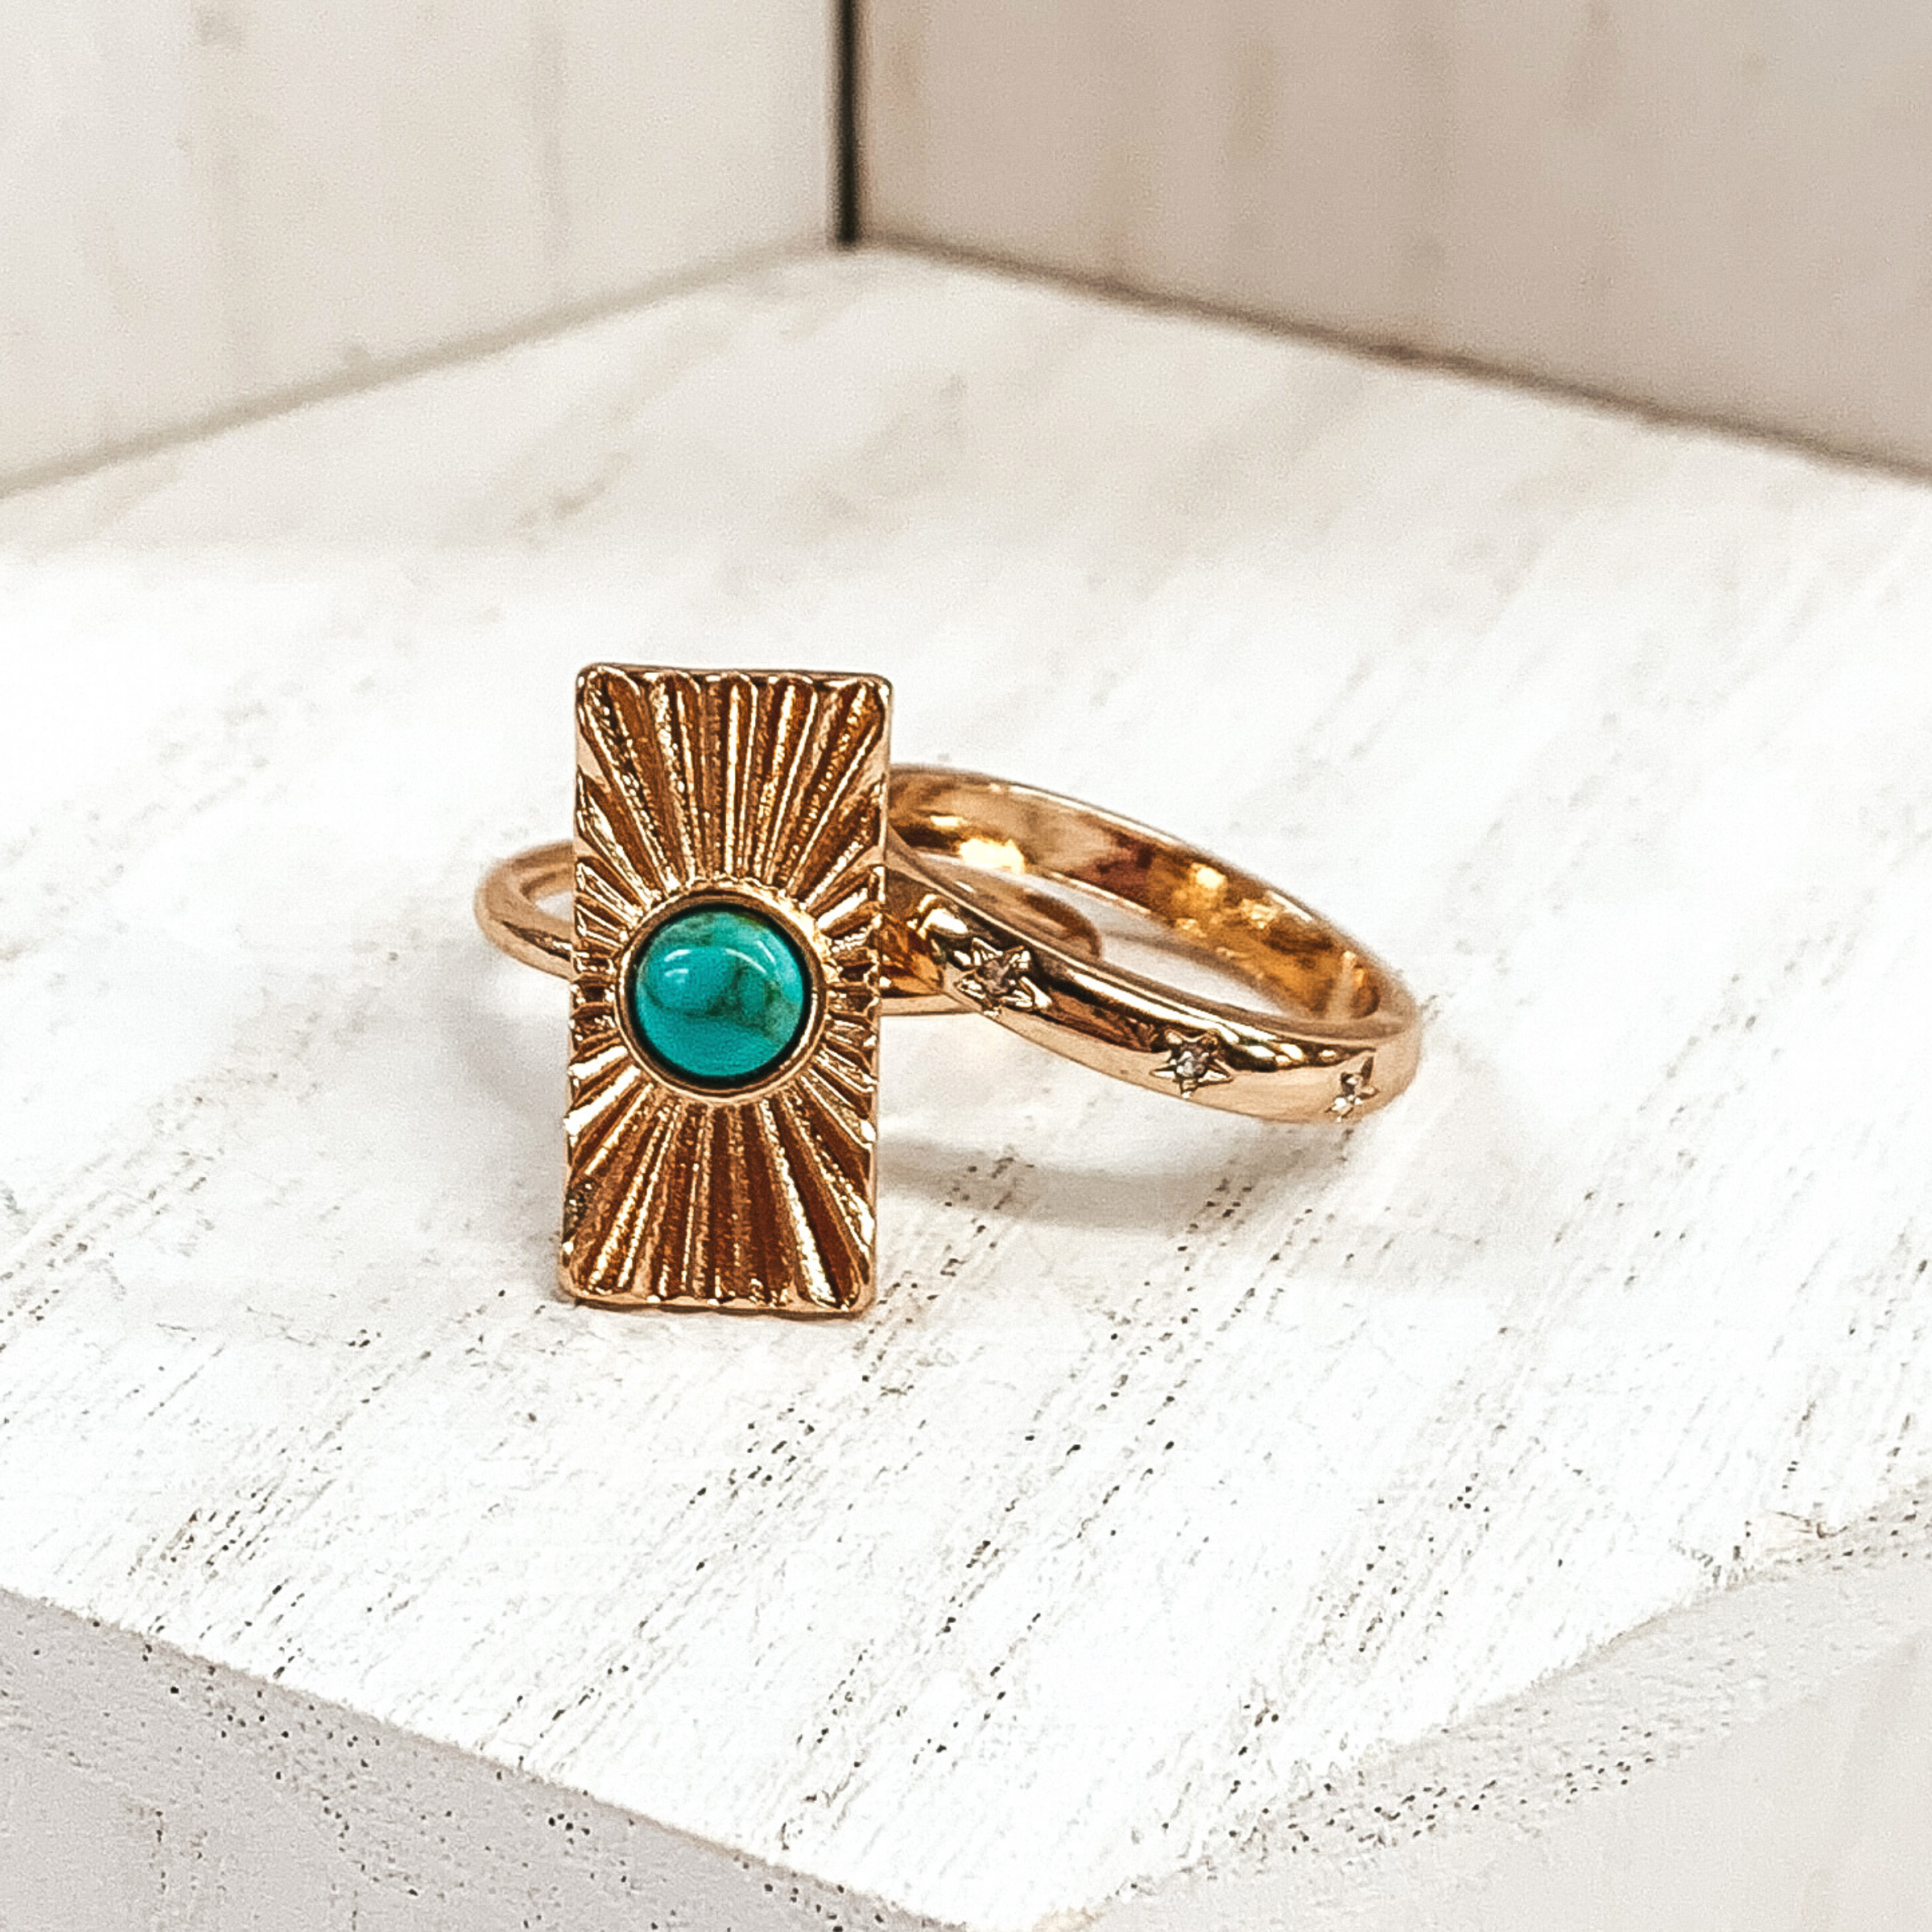 Both rings are gold in color. The first ring has an rectangle pendant with a starburst design on it and a center turquoise stone. The second ring has tiny engraved stars with clear crystals in the center of them These rings are pictured on a white background.